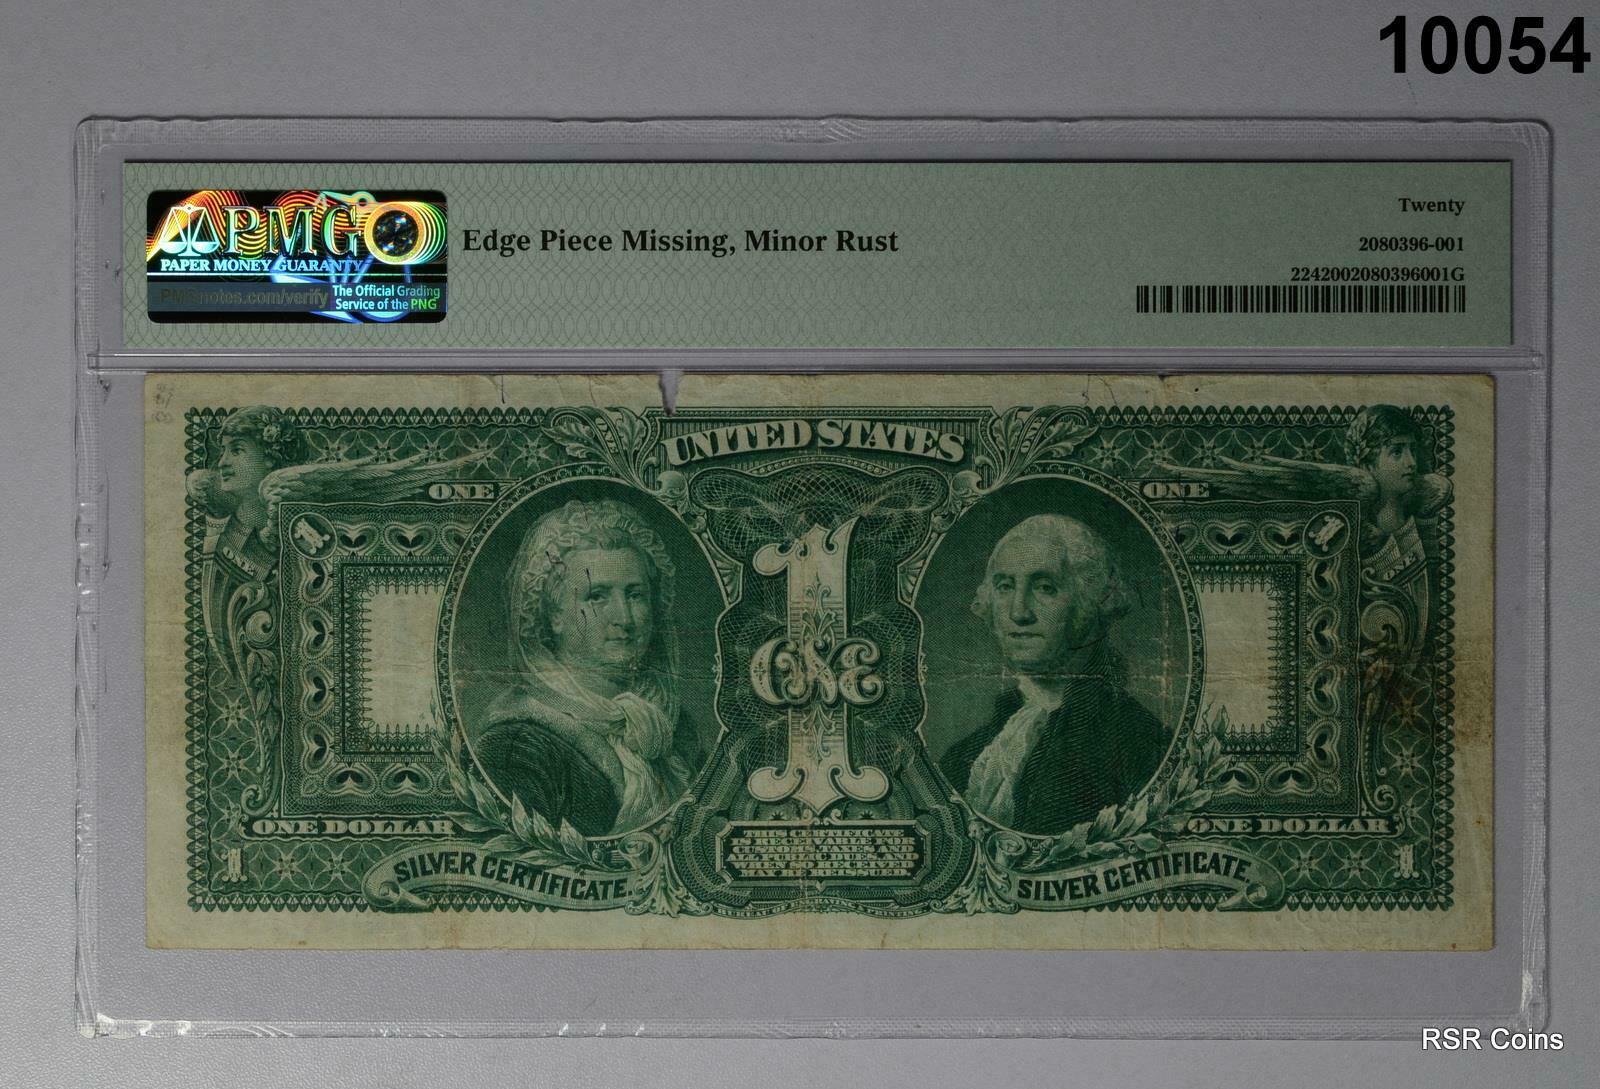 1896 $1 EDUCATIONAL SILVER CERTIFICATE FR#224 EDGE PIECE MISSING #10054